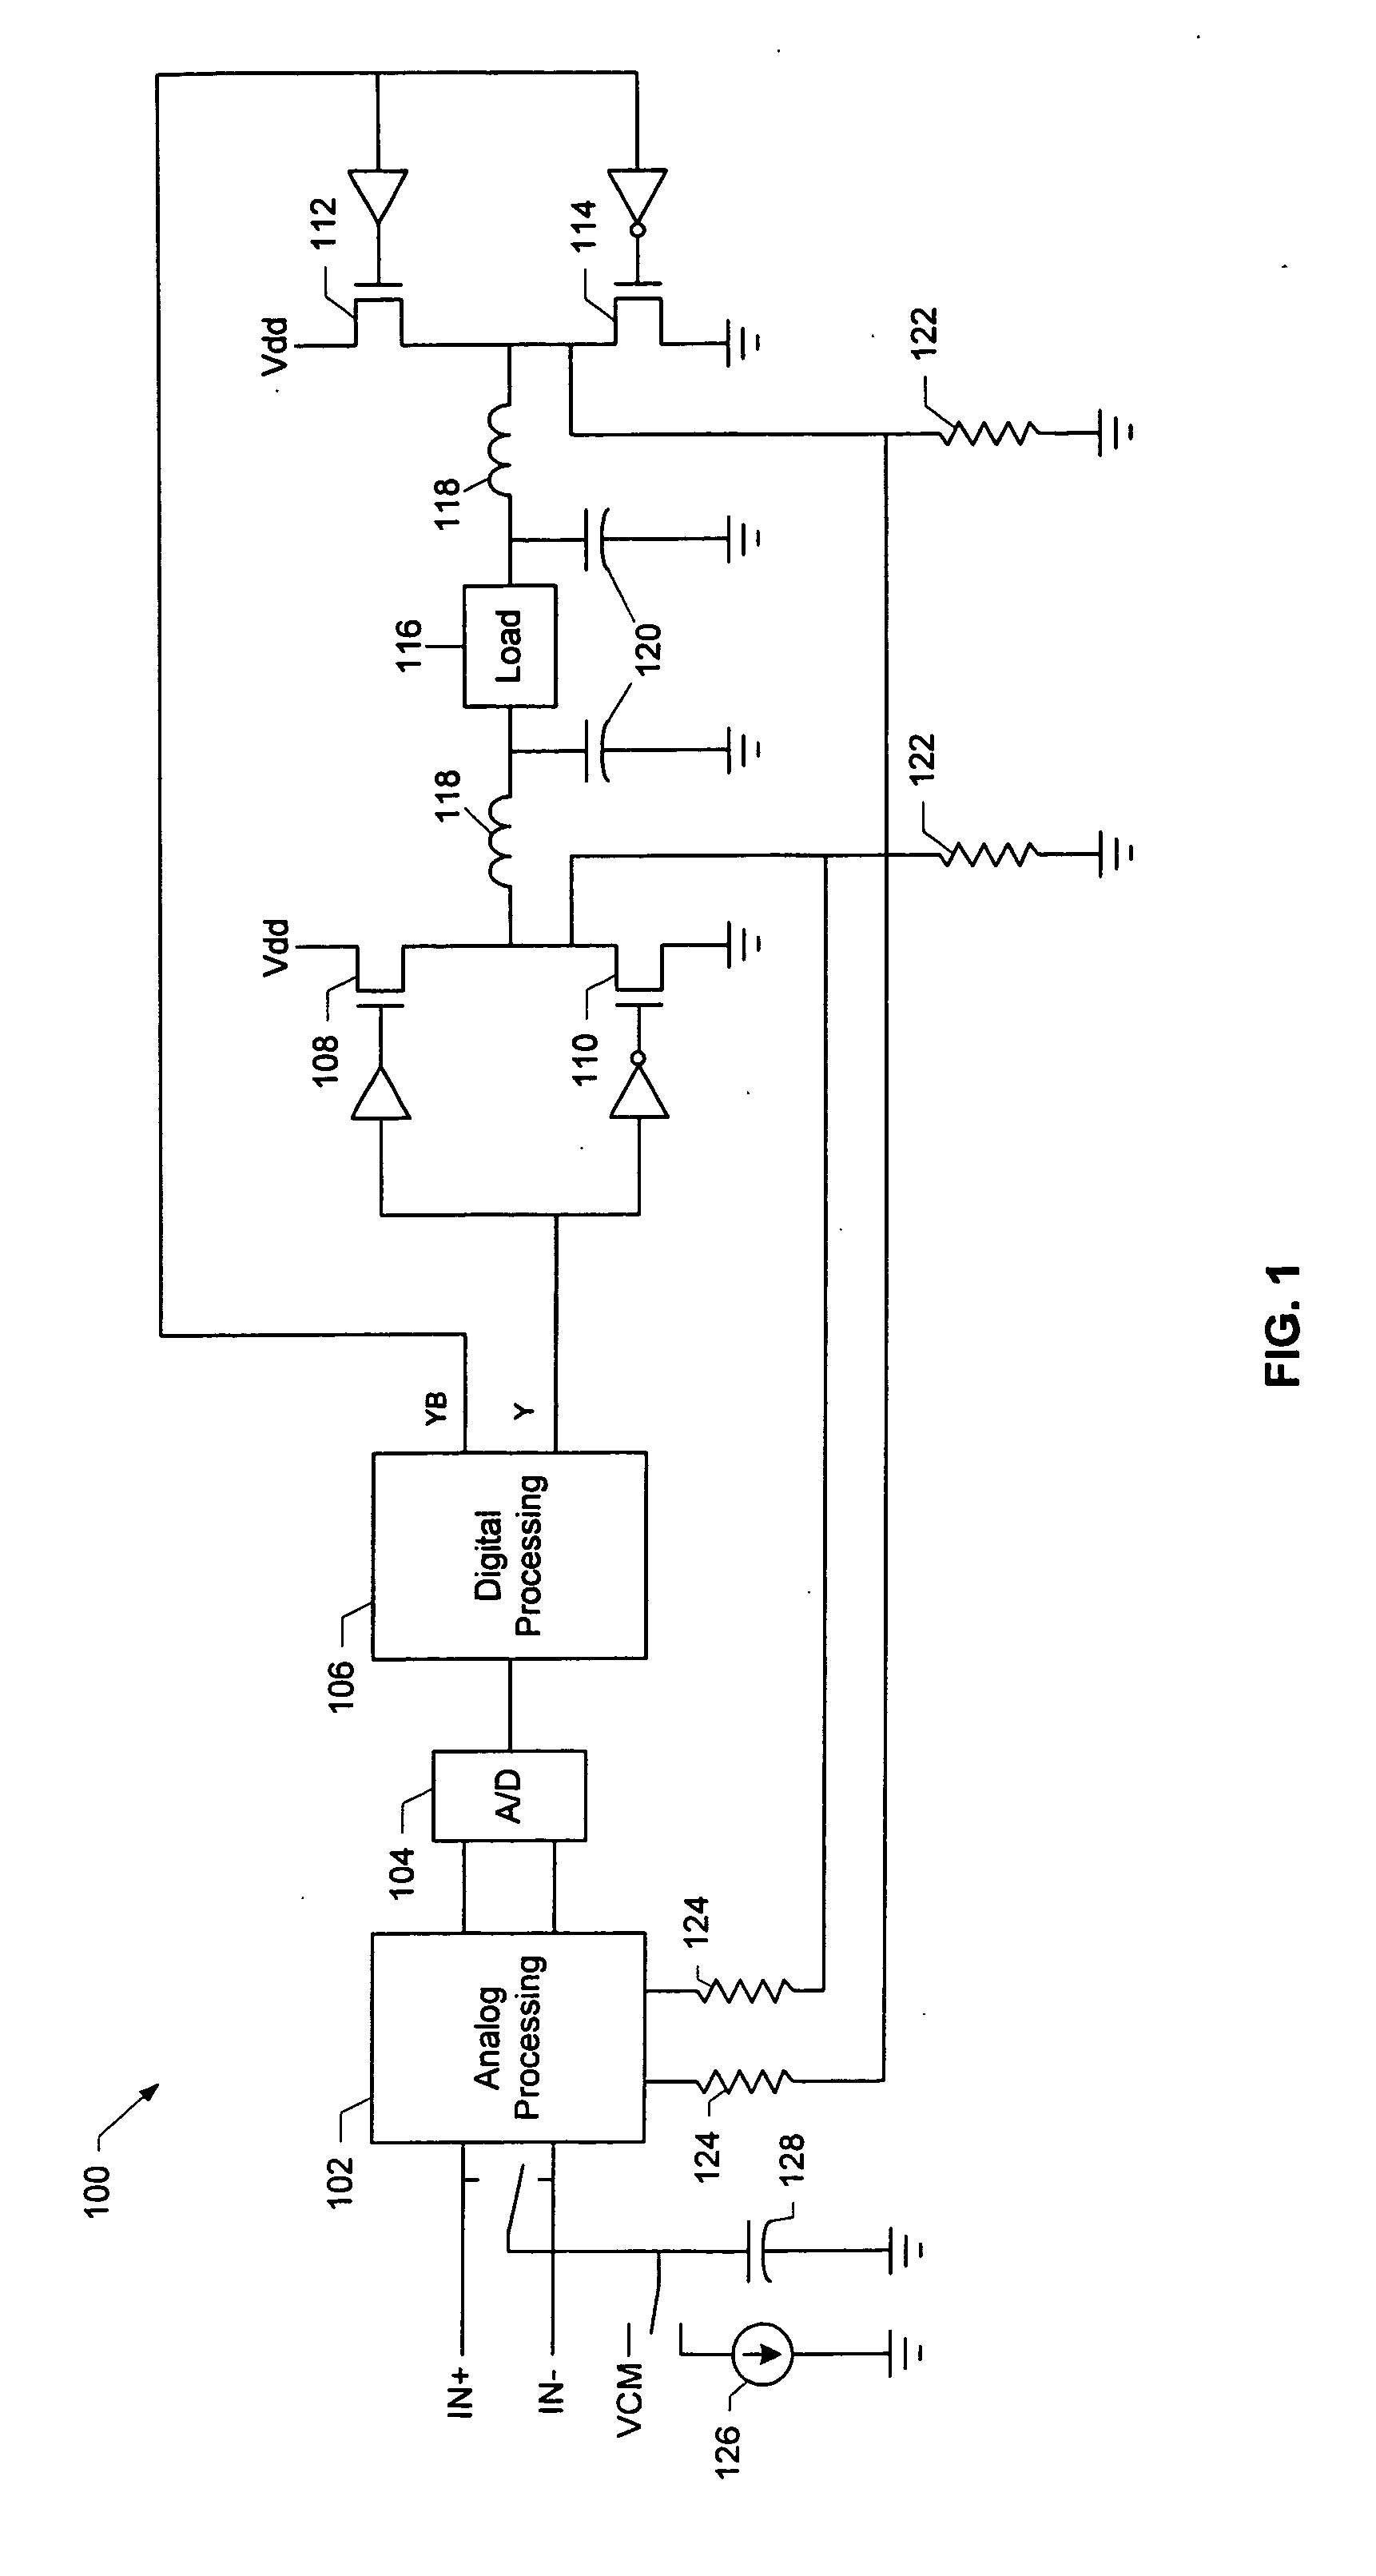 Offset cancellation in a switching amplifier